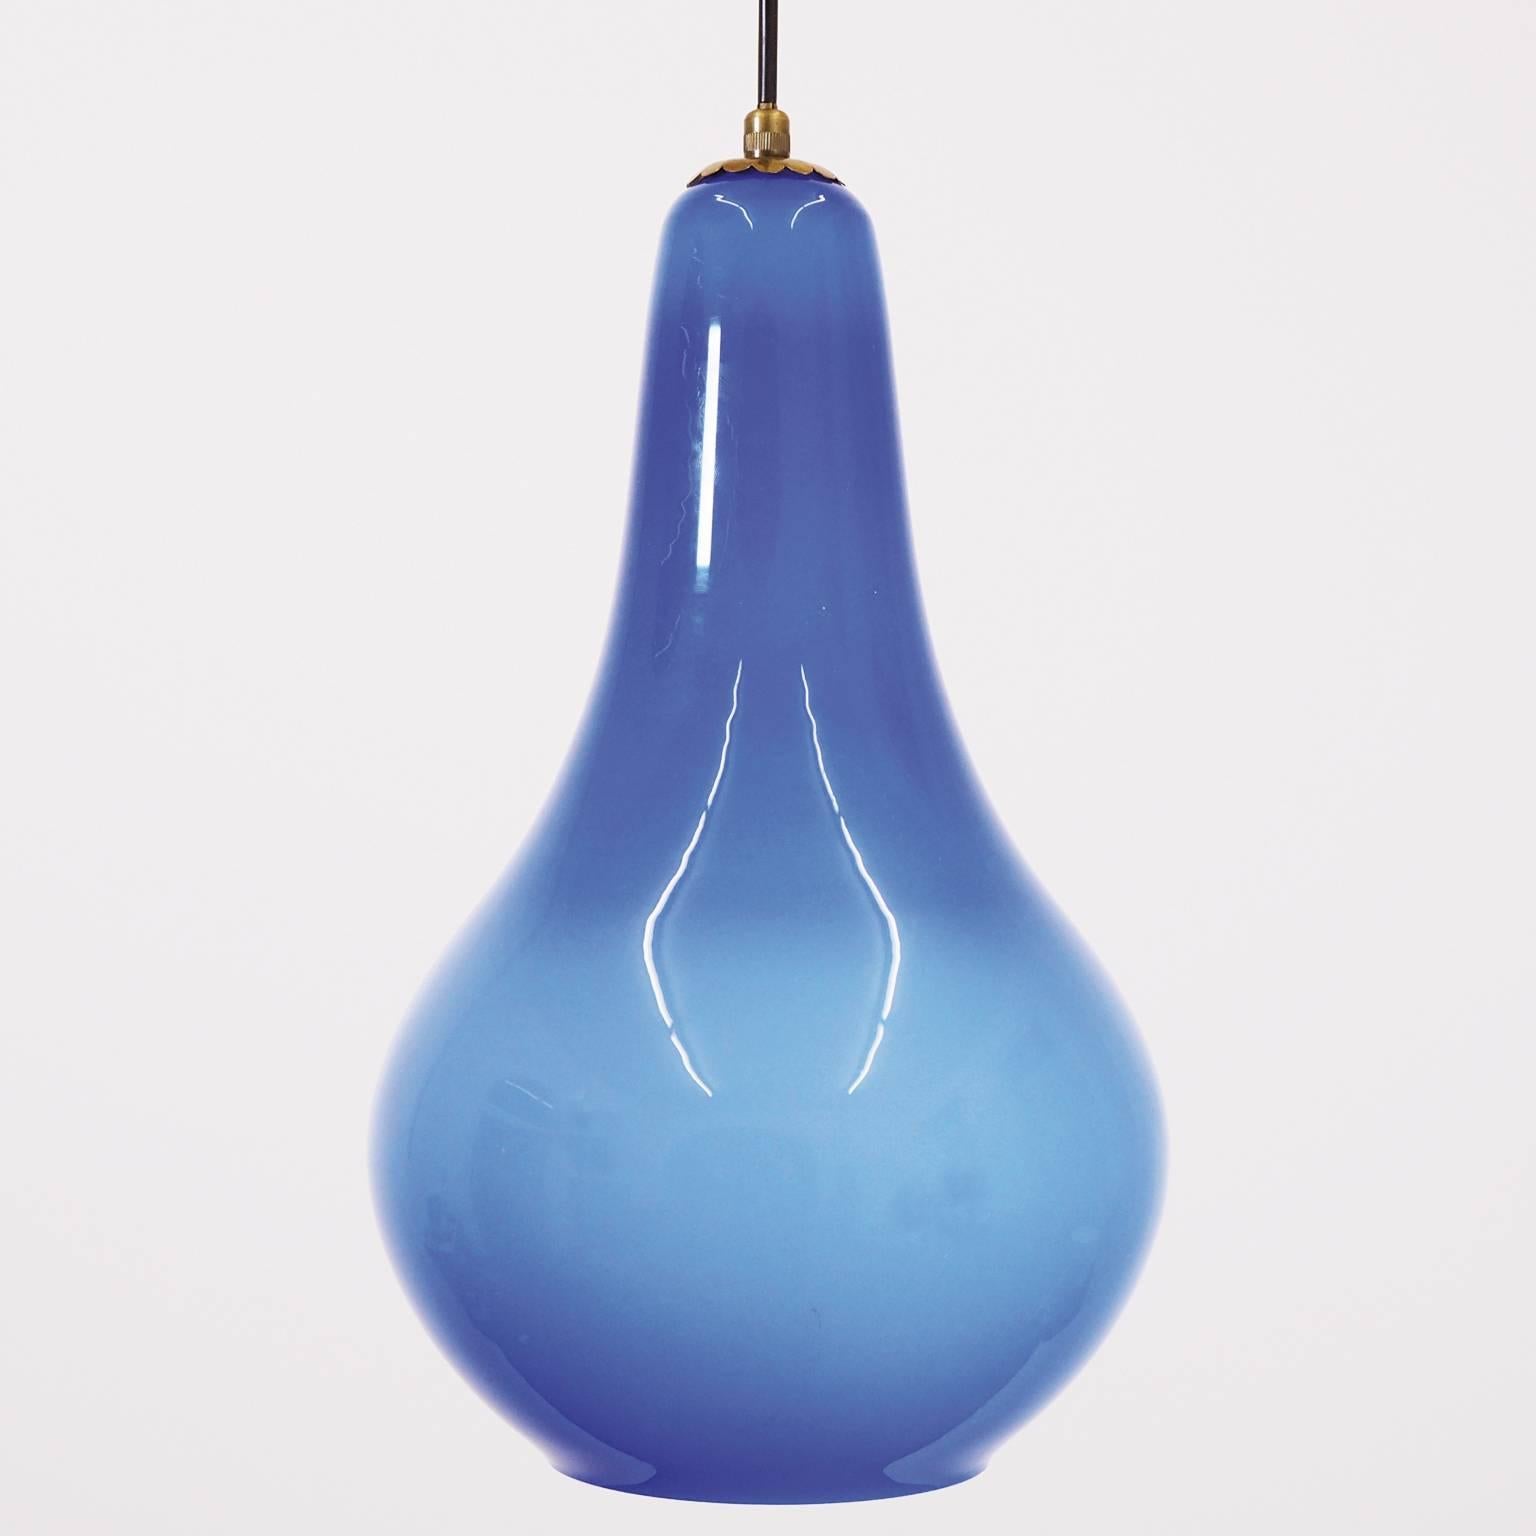 Lovely pear shaped cased blue glass pendant attributed to Vistosi. Charming brass detailing. One original brass E27 socket with new extra long wiring.